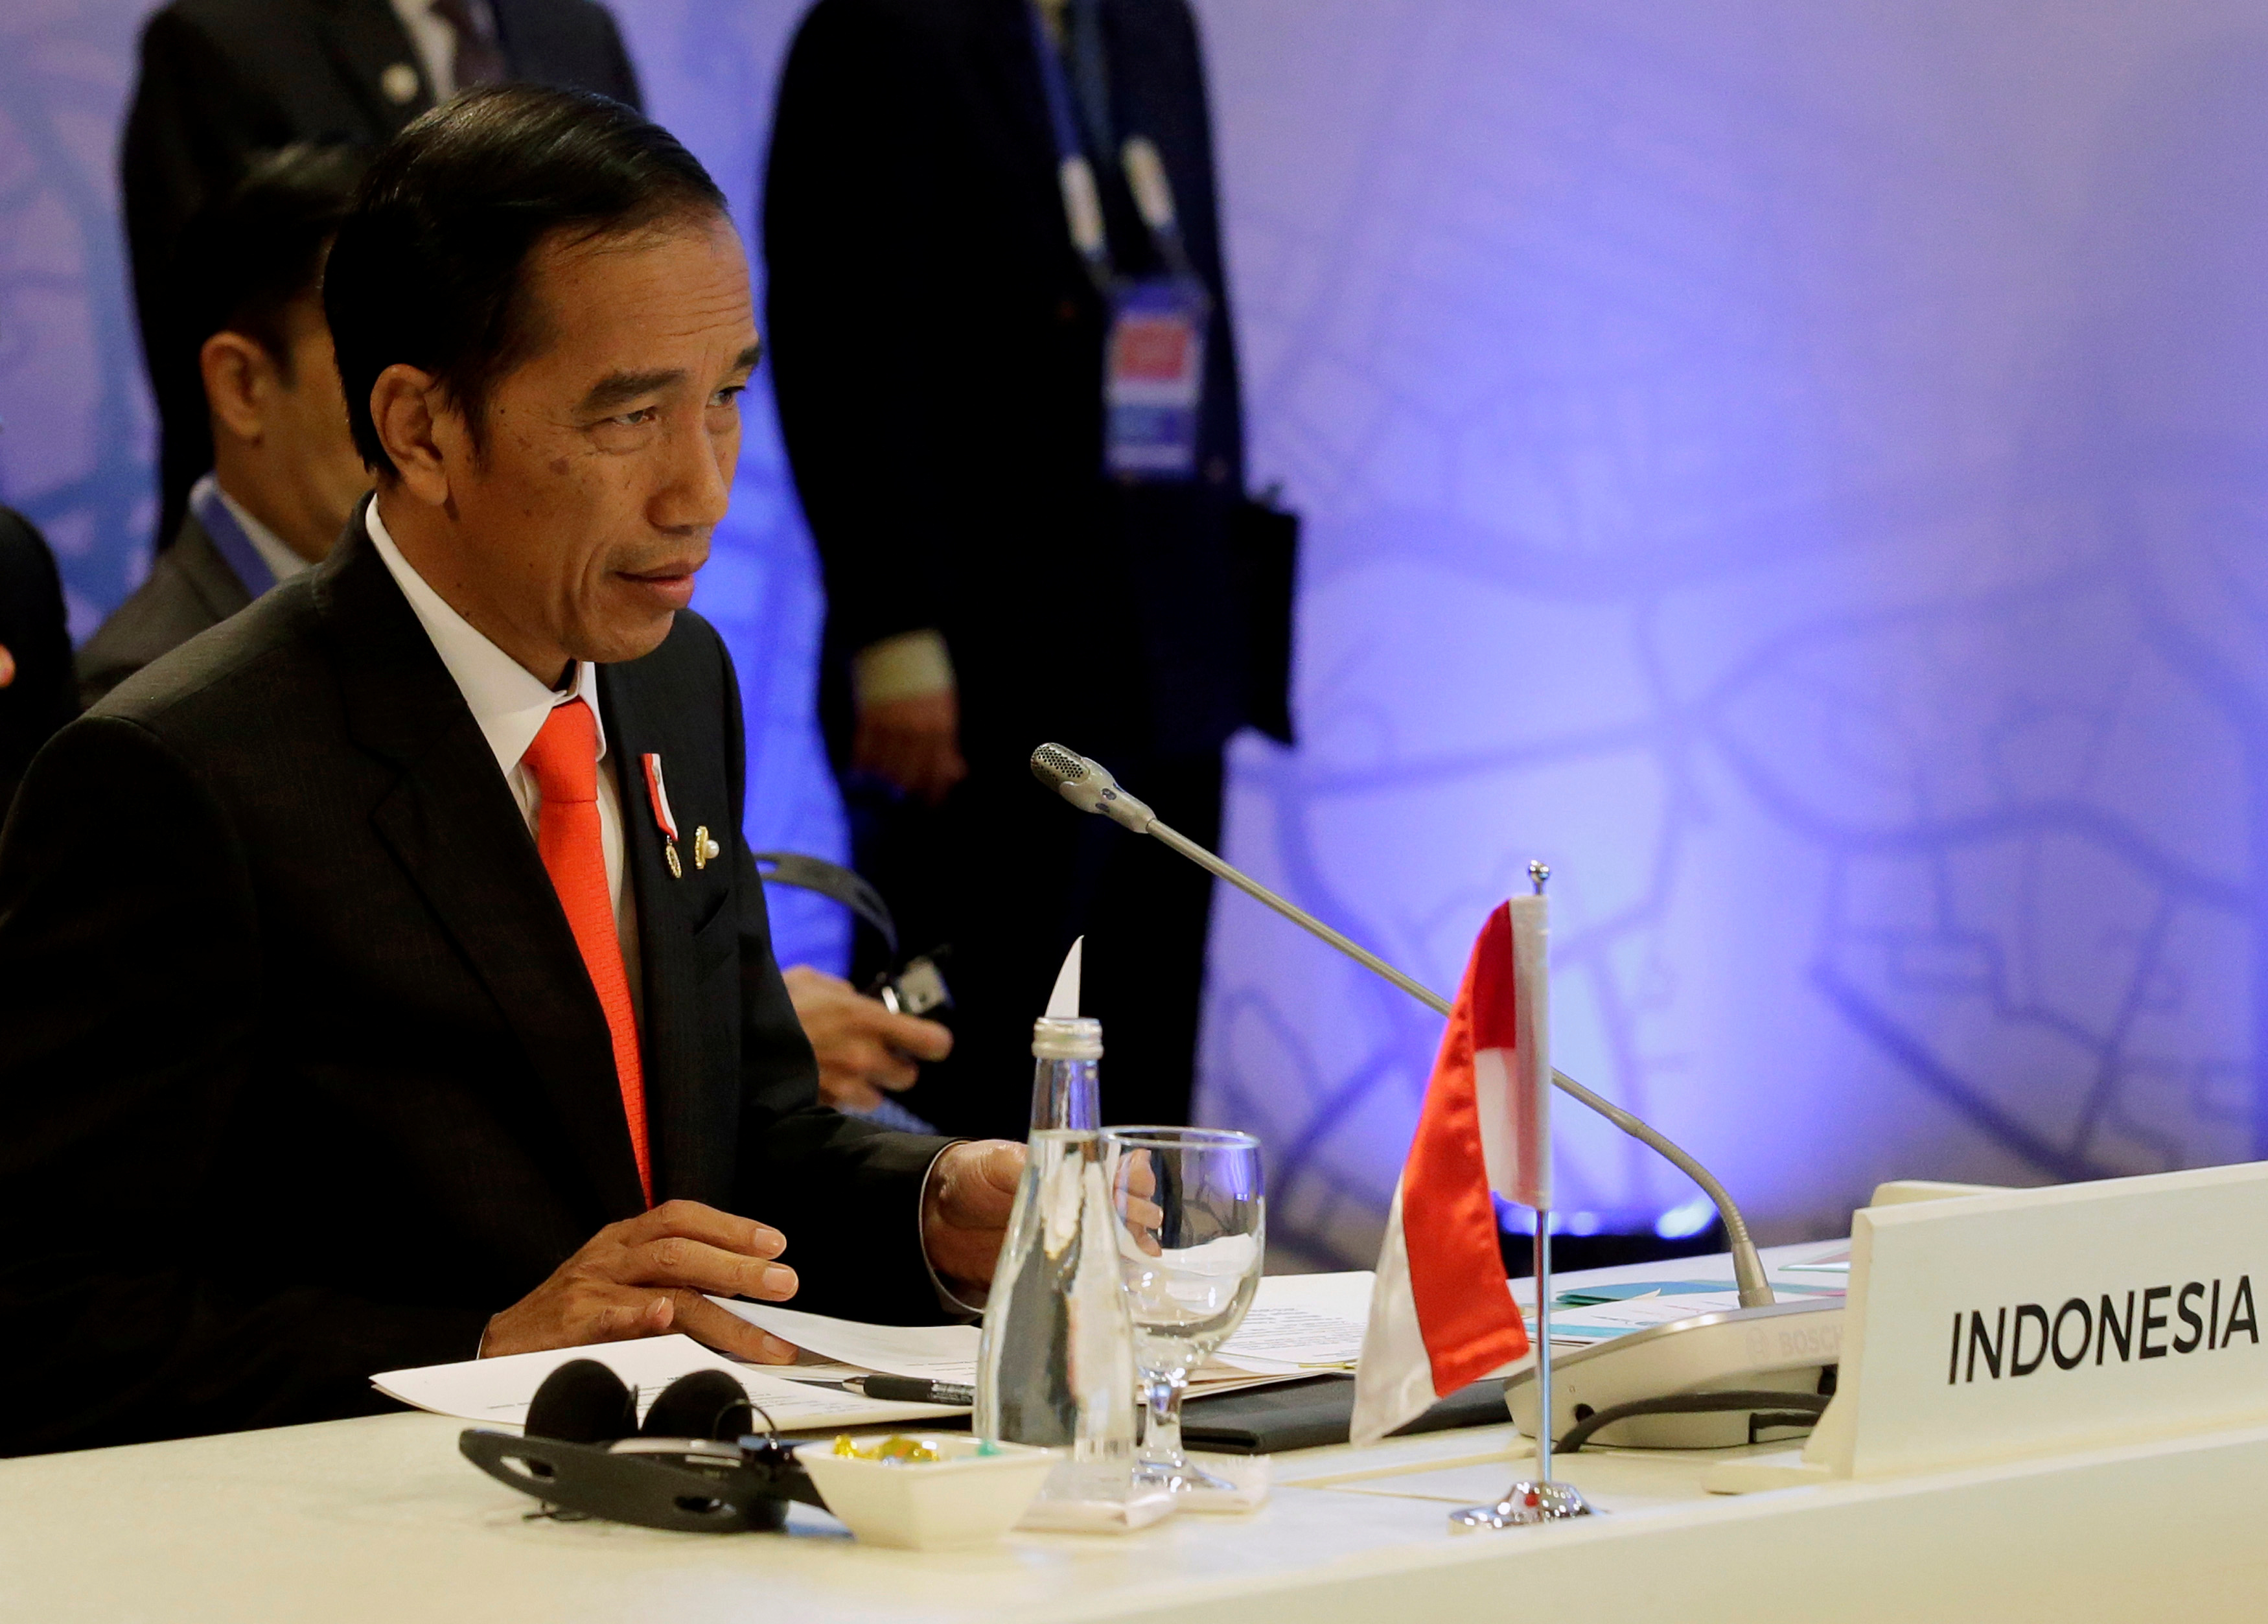 Indonesian President Joko "Jokowi" Widodo speaks during the 10th Indonesia - Malaysia - Thailand Growth Triangle (IMT-GT) Summit as part of the 30th Association of Southeast Asian Nations (ASEAN) summit in metropolitan Manila